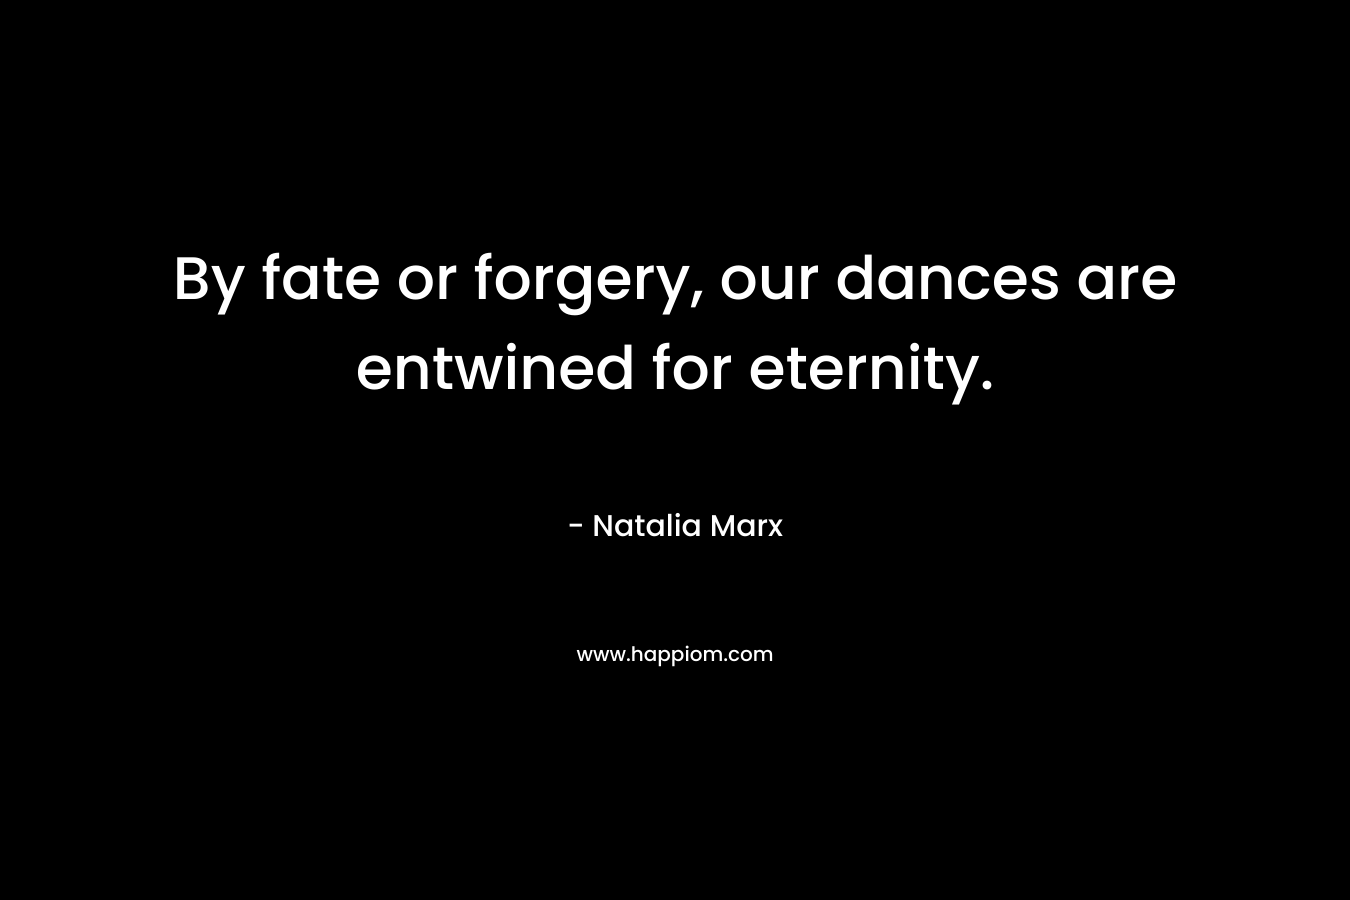 By fate or forgery, our dances are entwined for eternity. – Natalia Marx